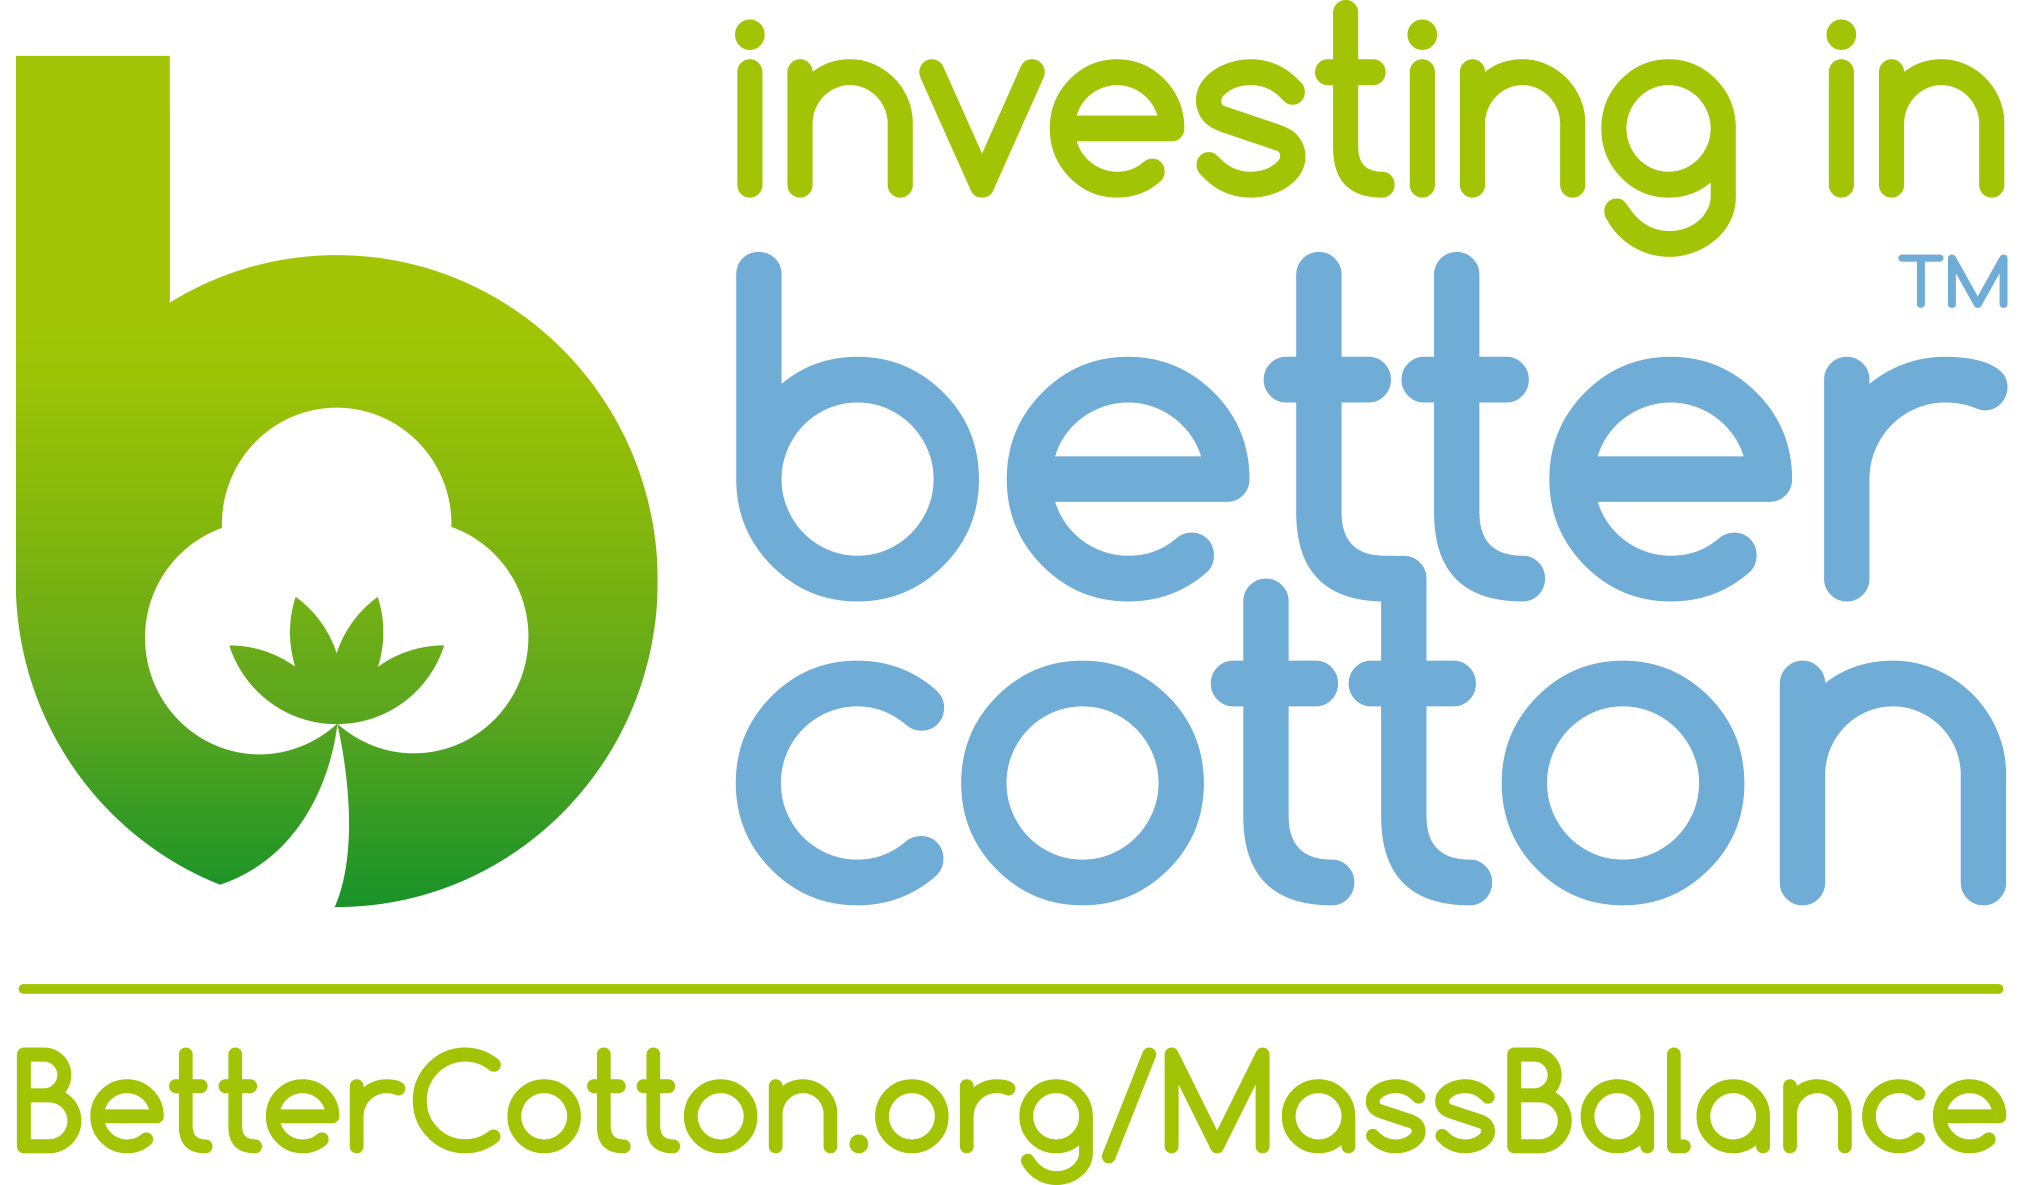 Investing in Better Cotton